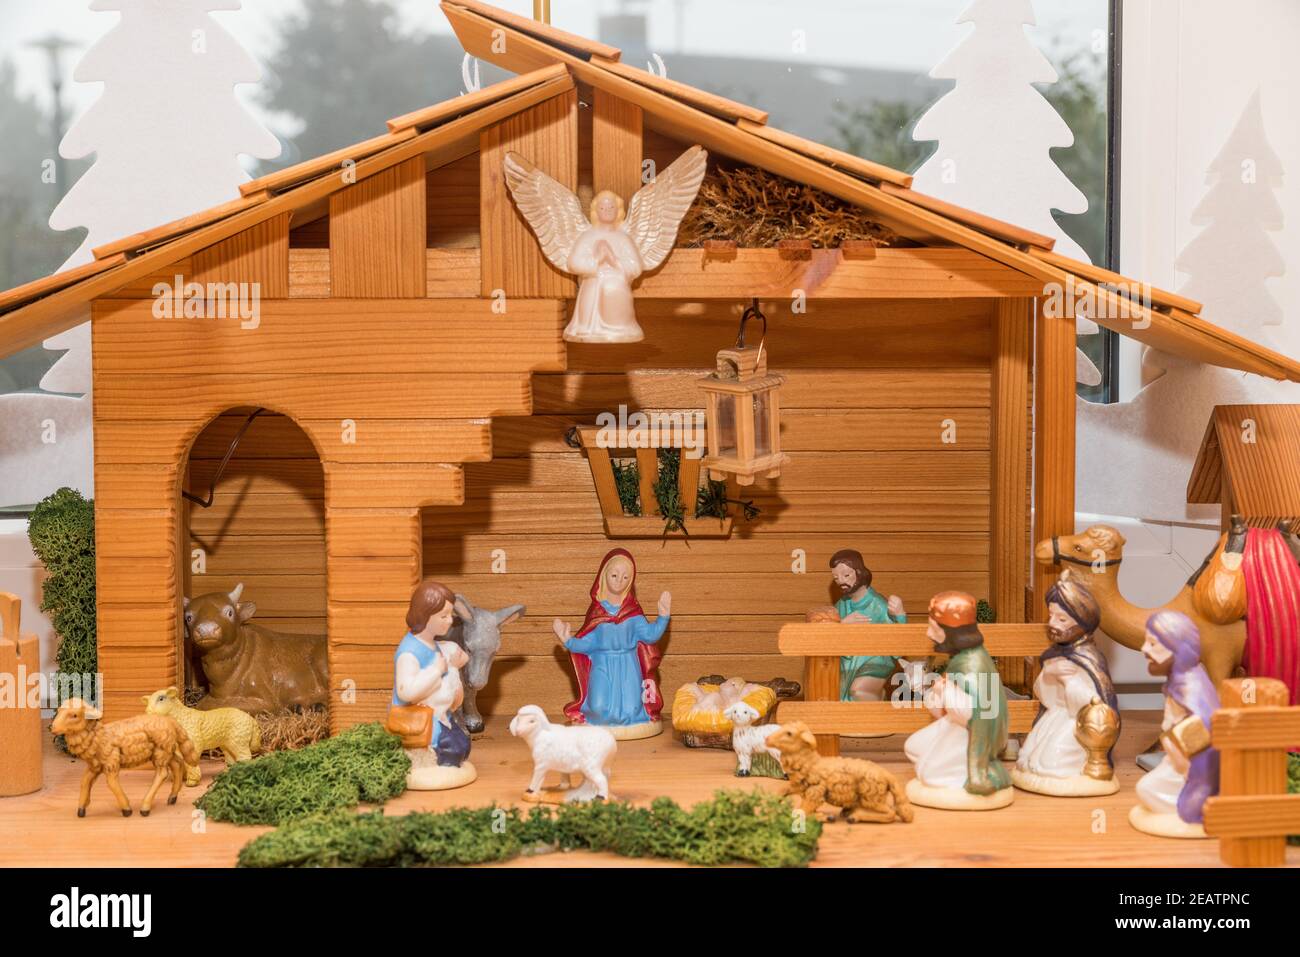 Wooden crib with painted crib figures Stock Photo